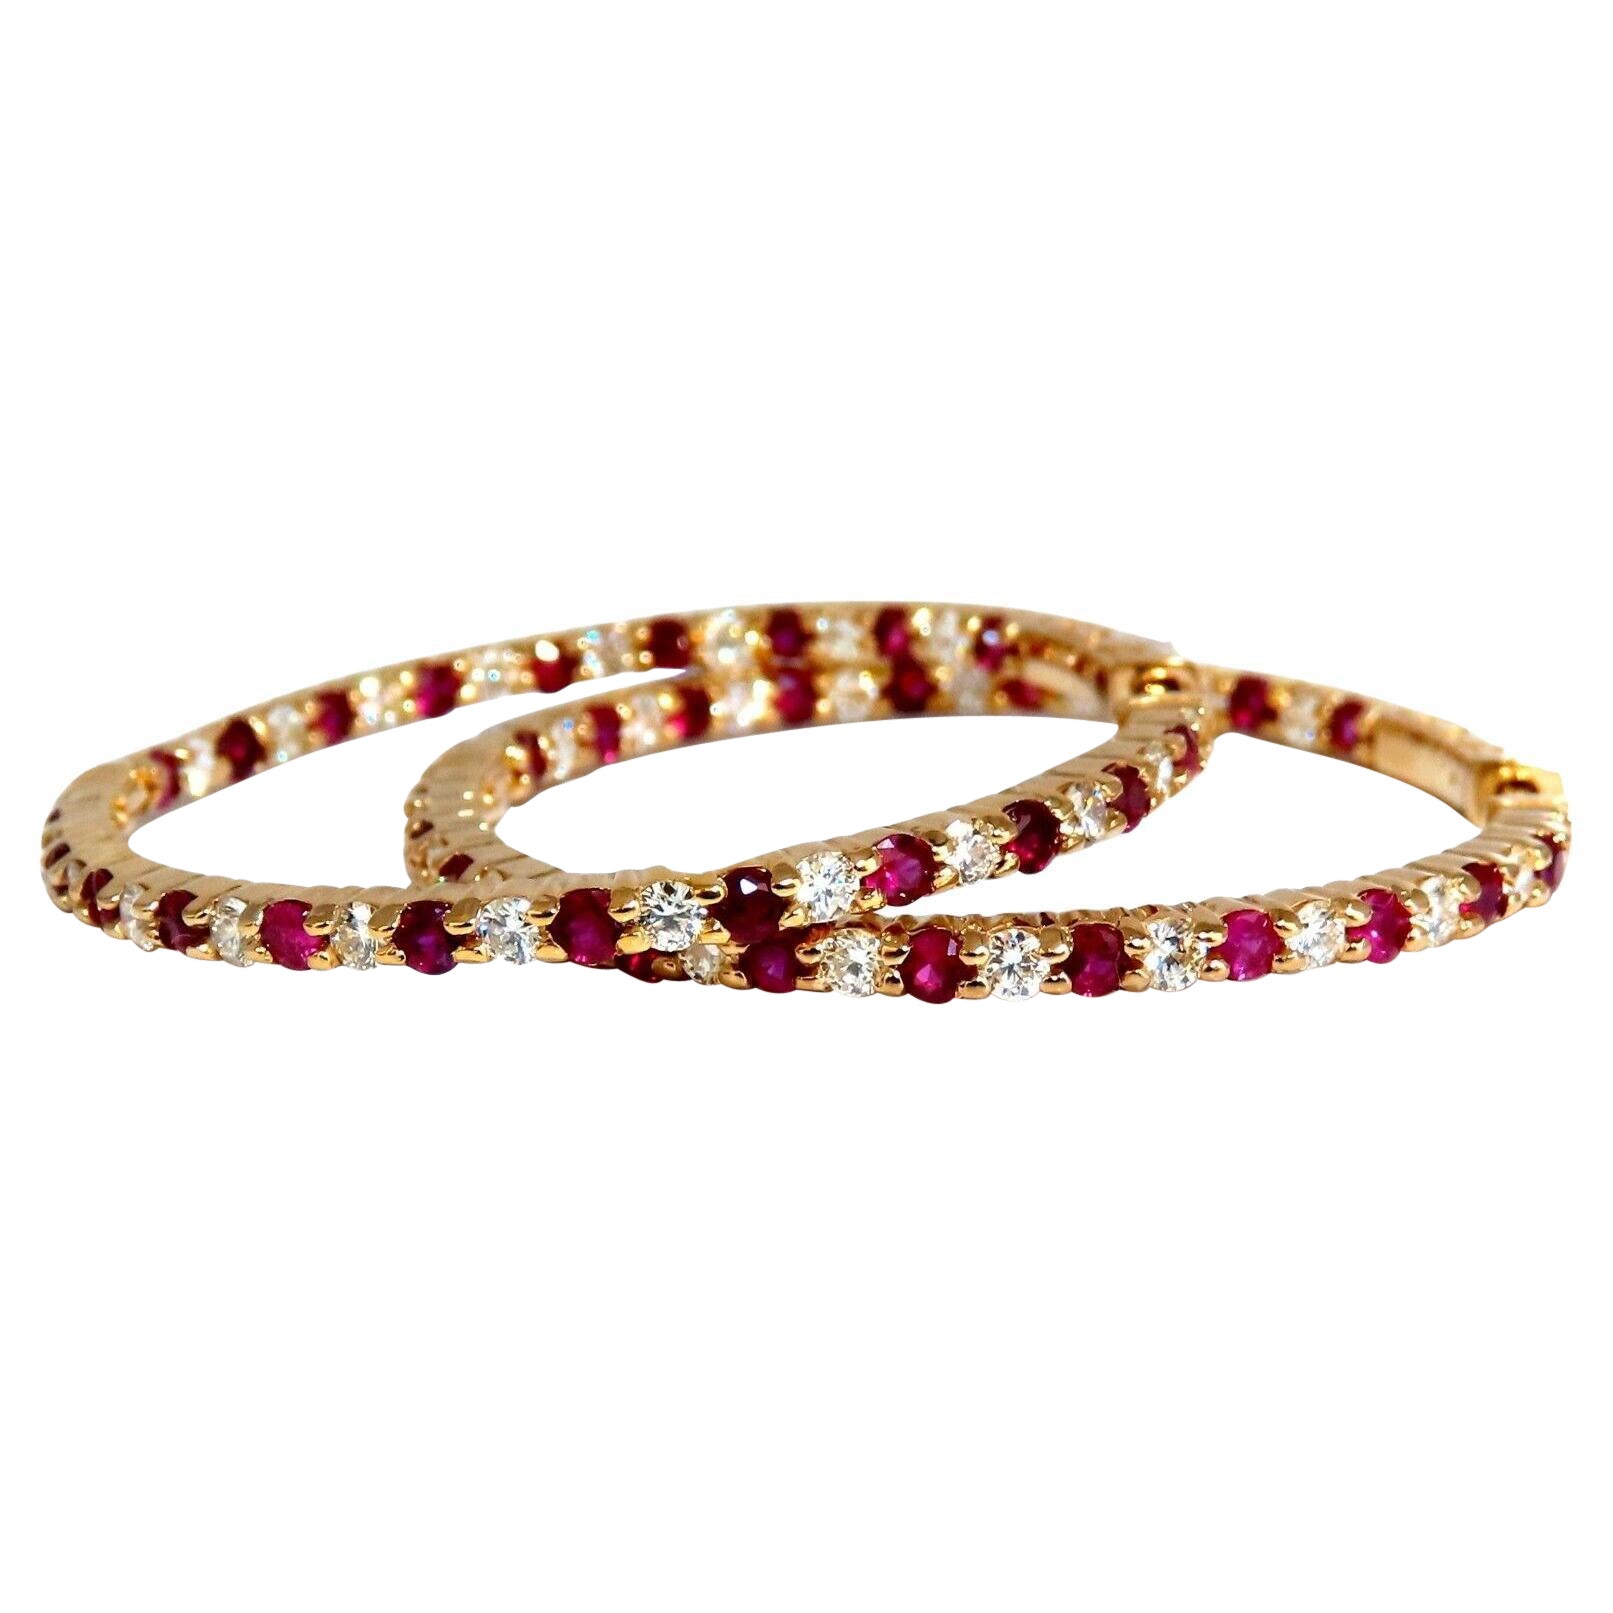 4.80ct Natural Ruby Diamonds Hoop Earrings 14kt Yellow Gold Inside Out For Sale